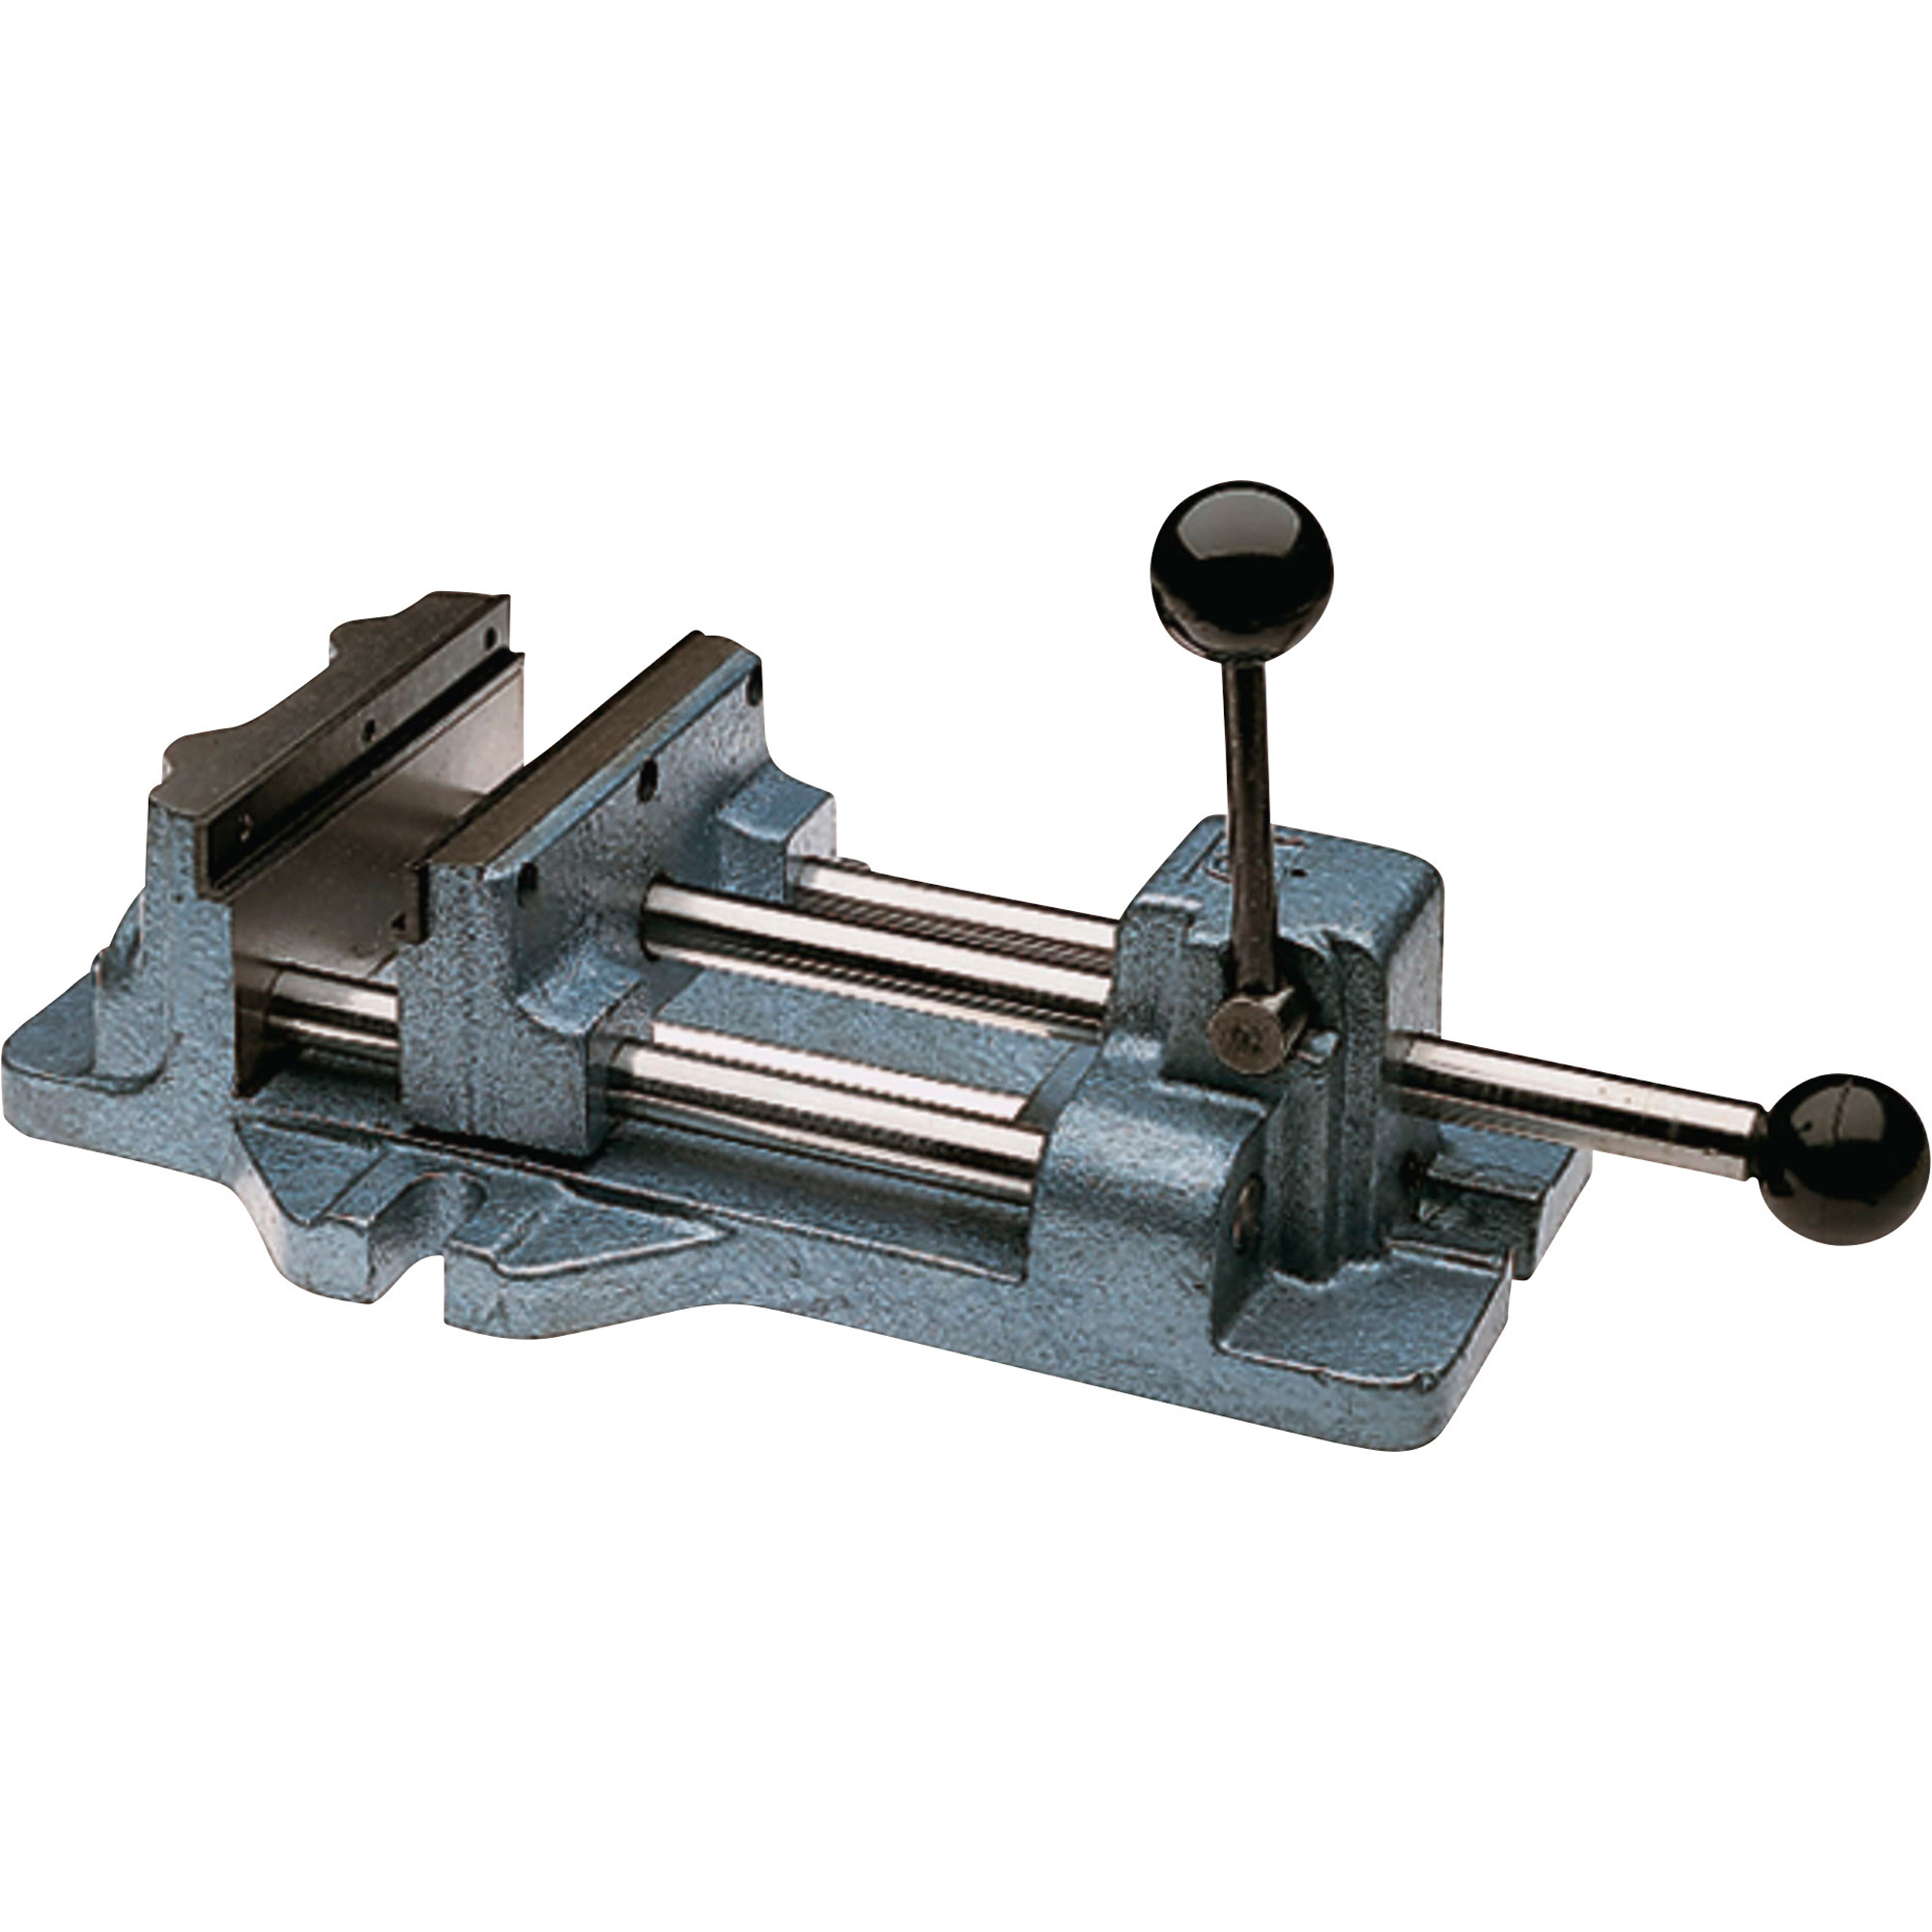 Wilton Cam Action Drill Press Vise, 4Inch Jaw Width, Model 1204